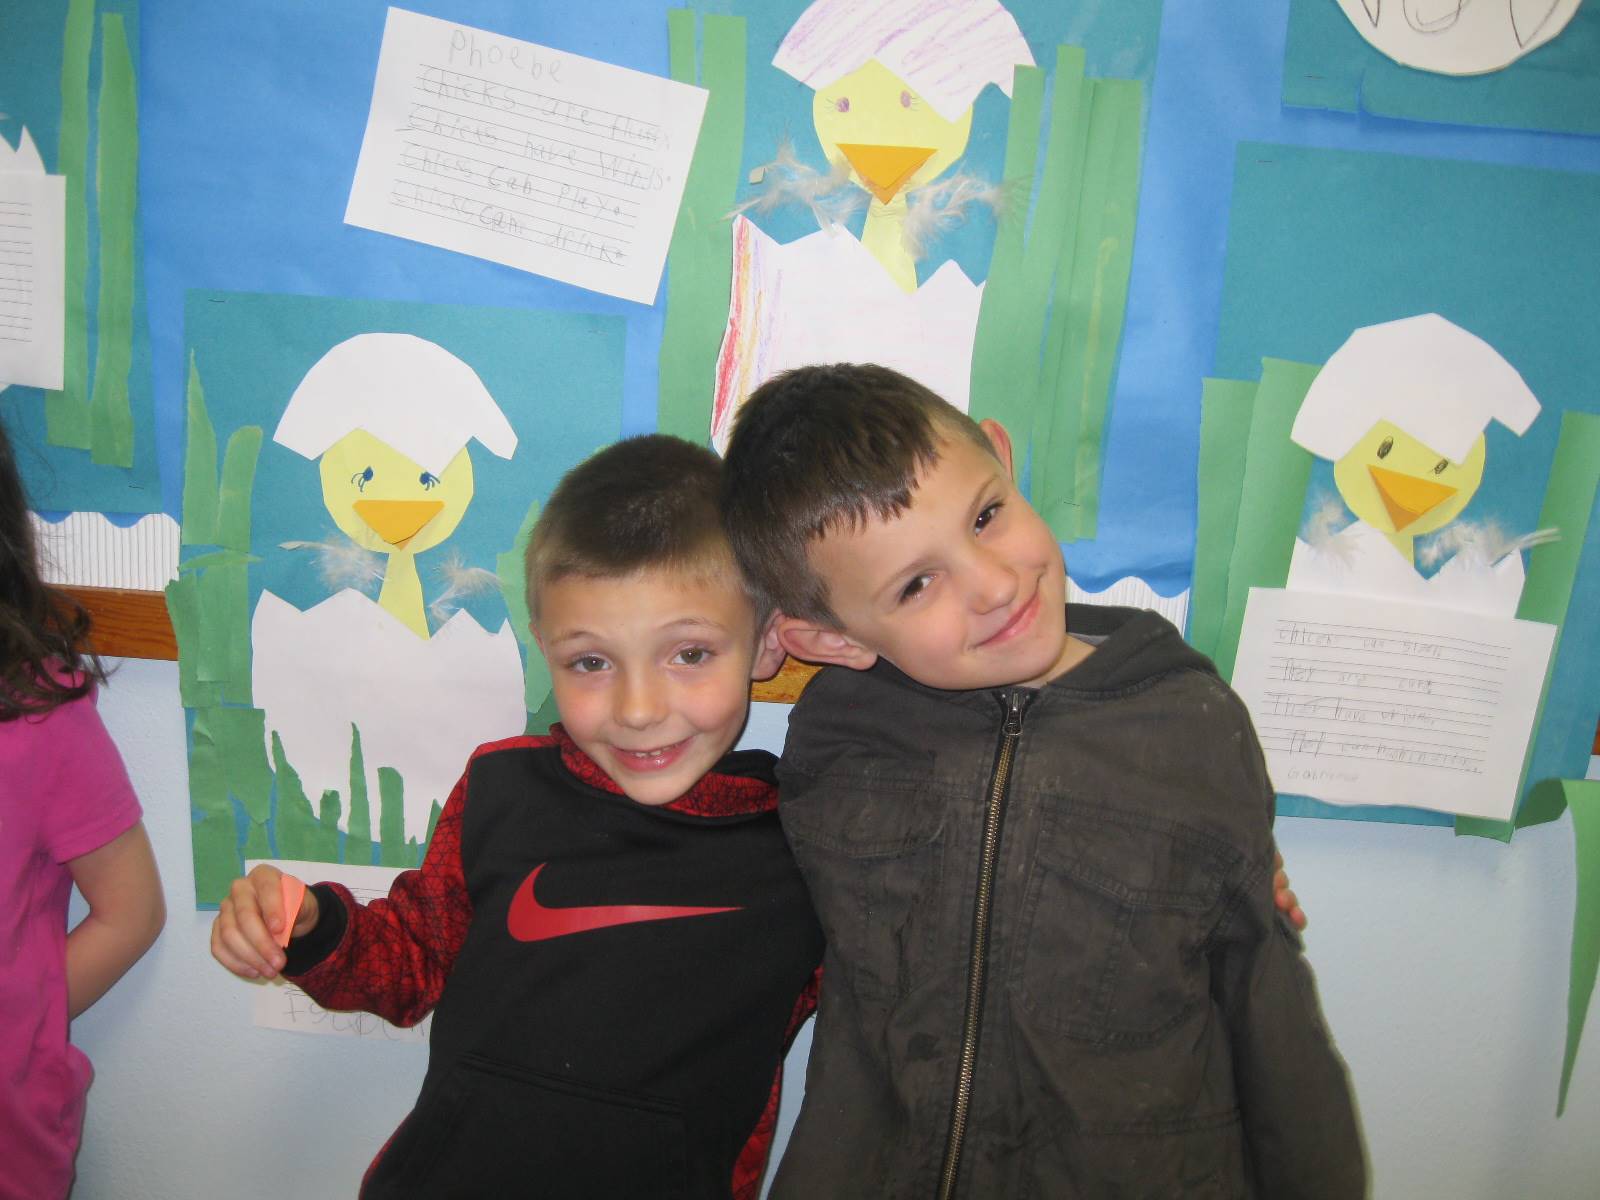 2 Students by their bulletin board of chicks.